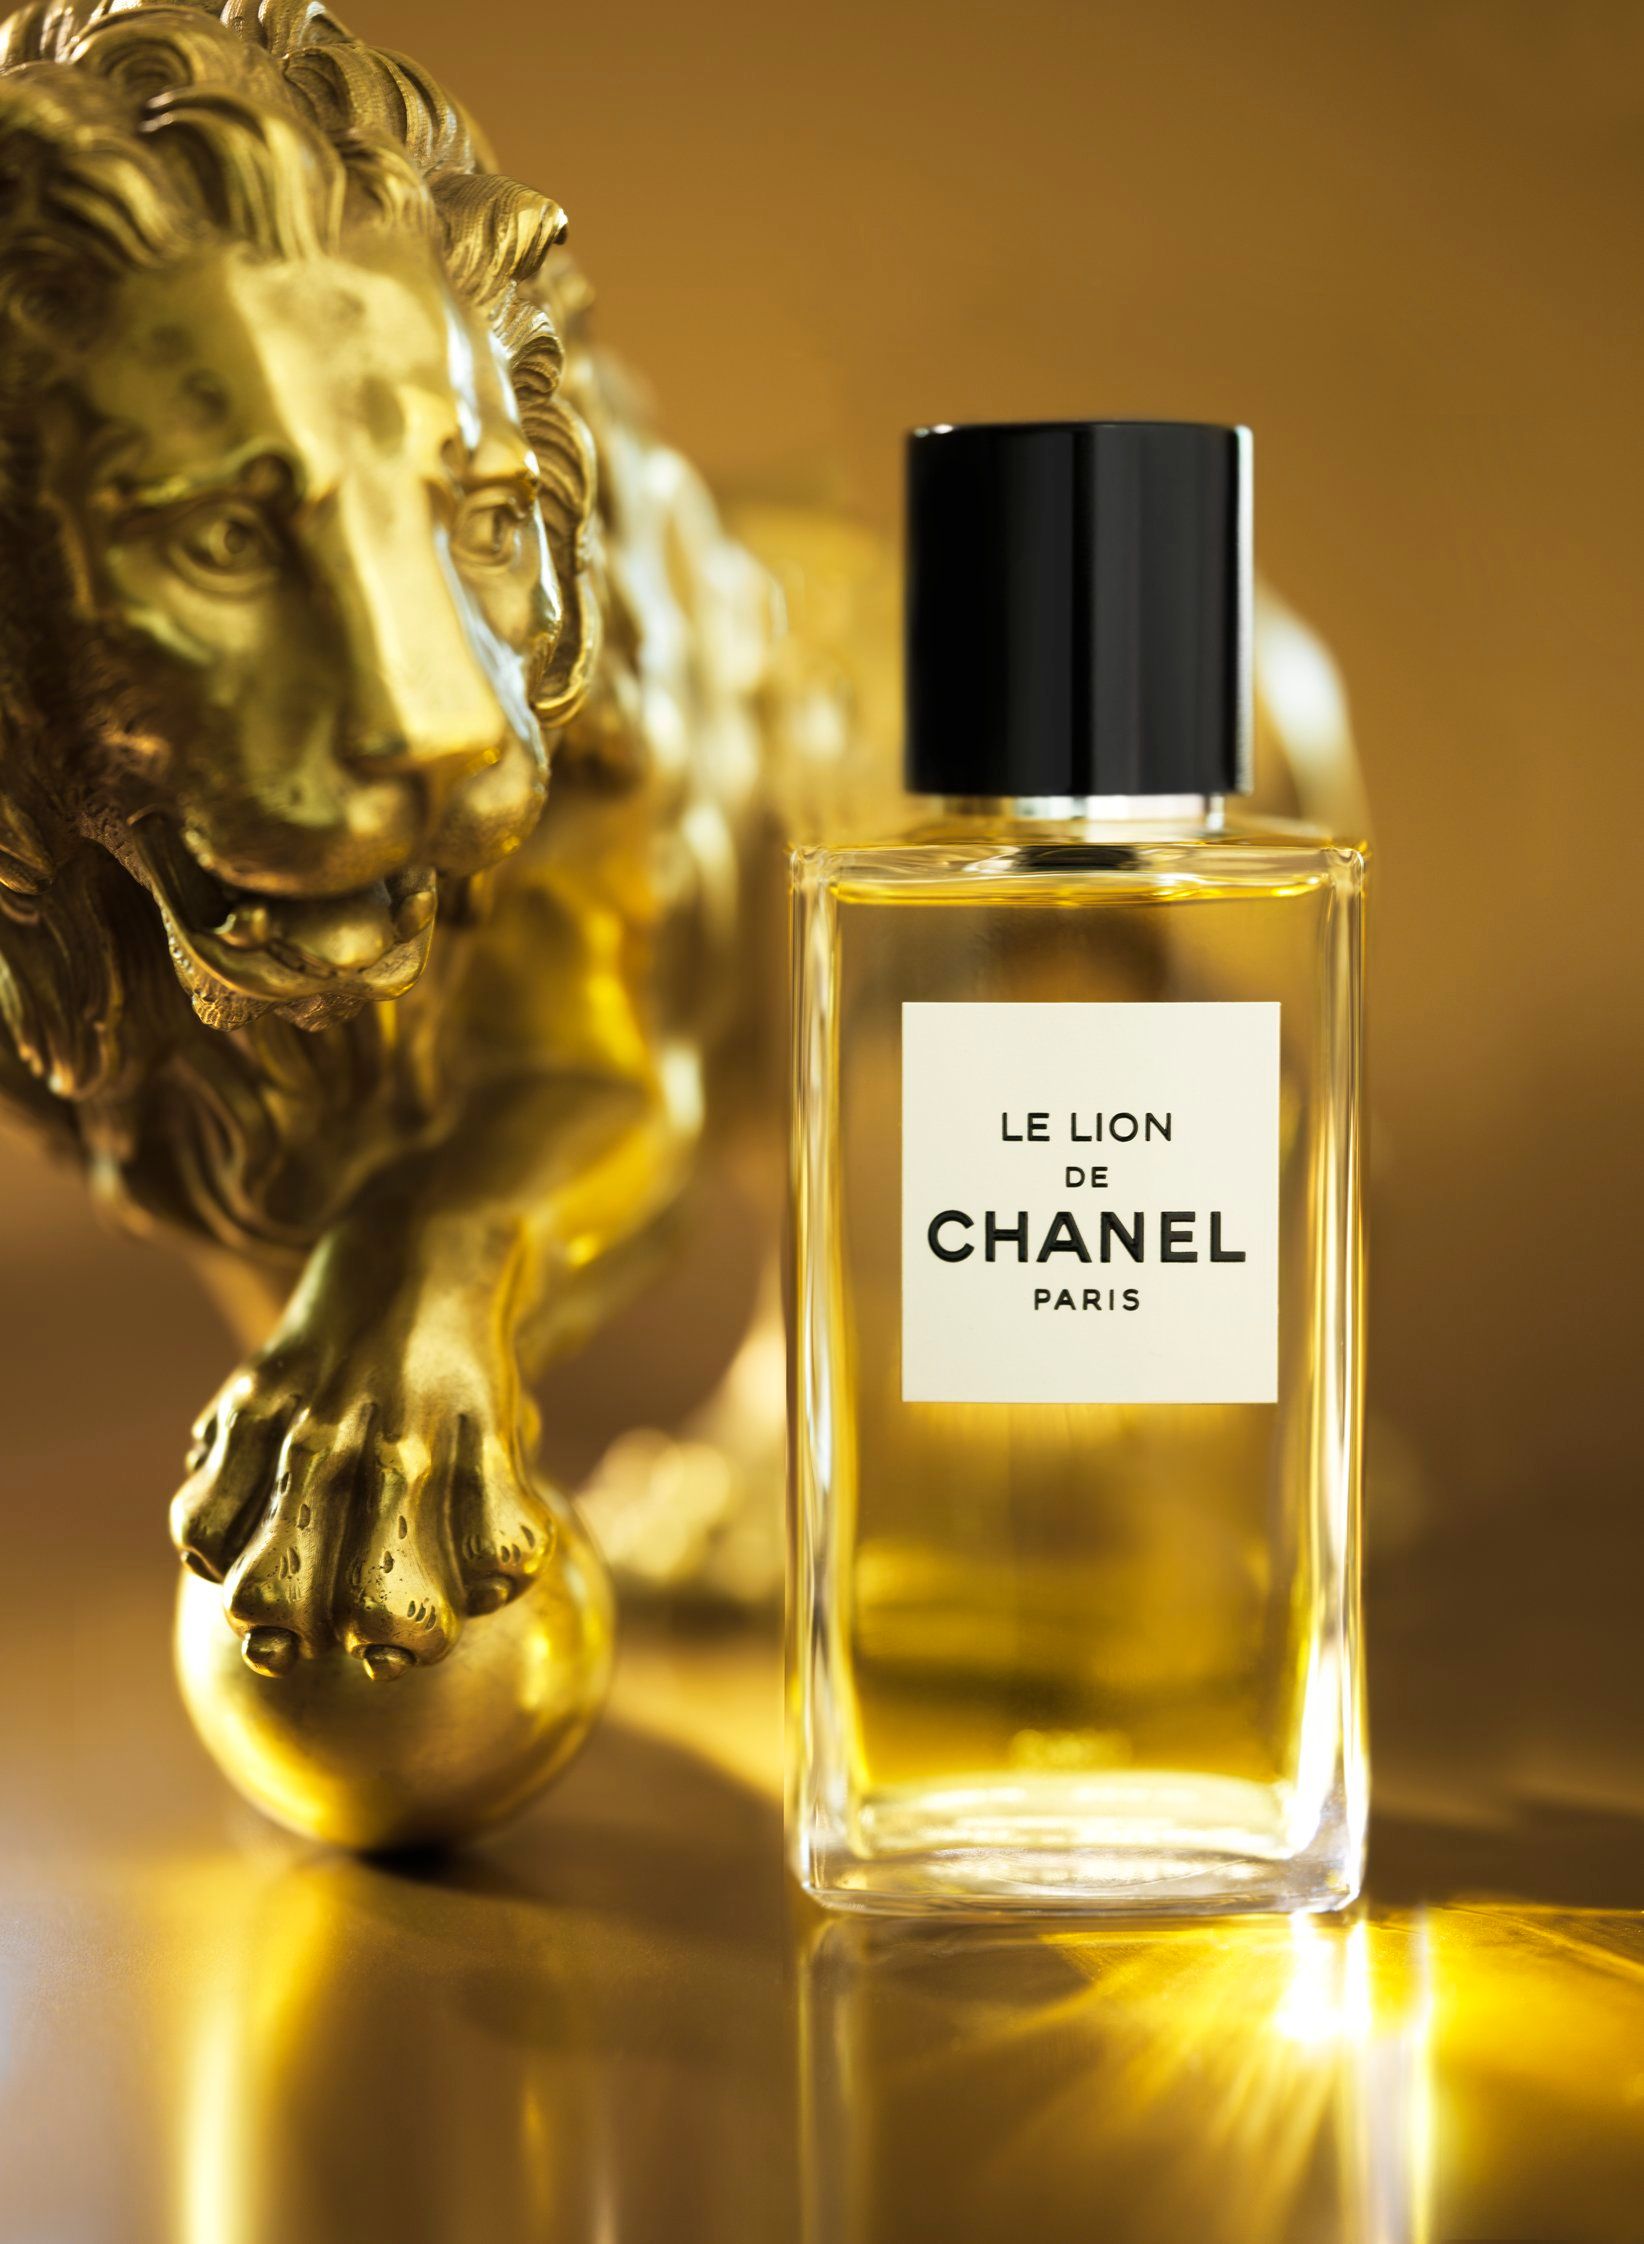 Le Lion de Chanel, the newest oriental fragrance from Chanel is here